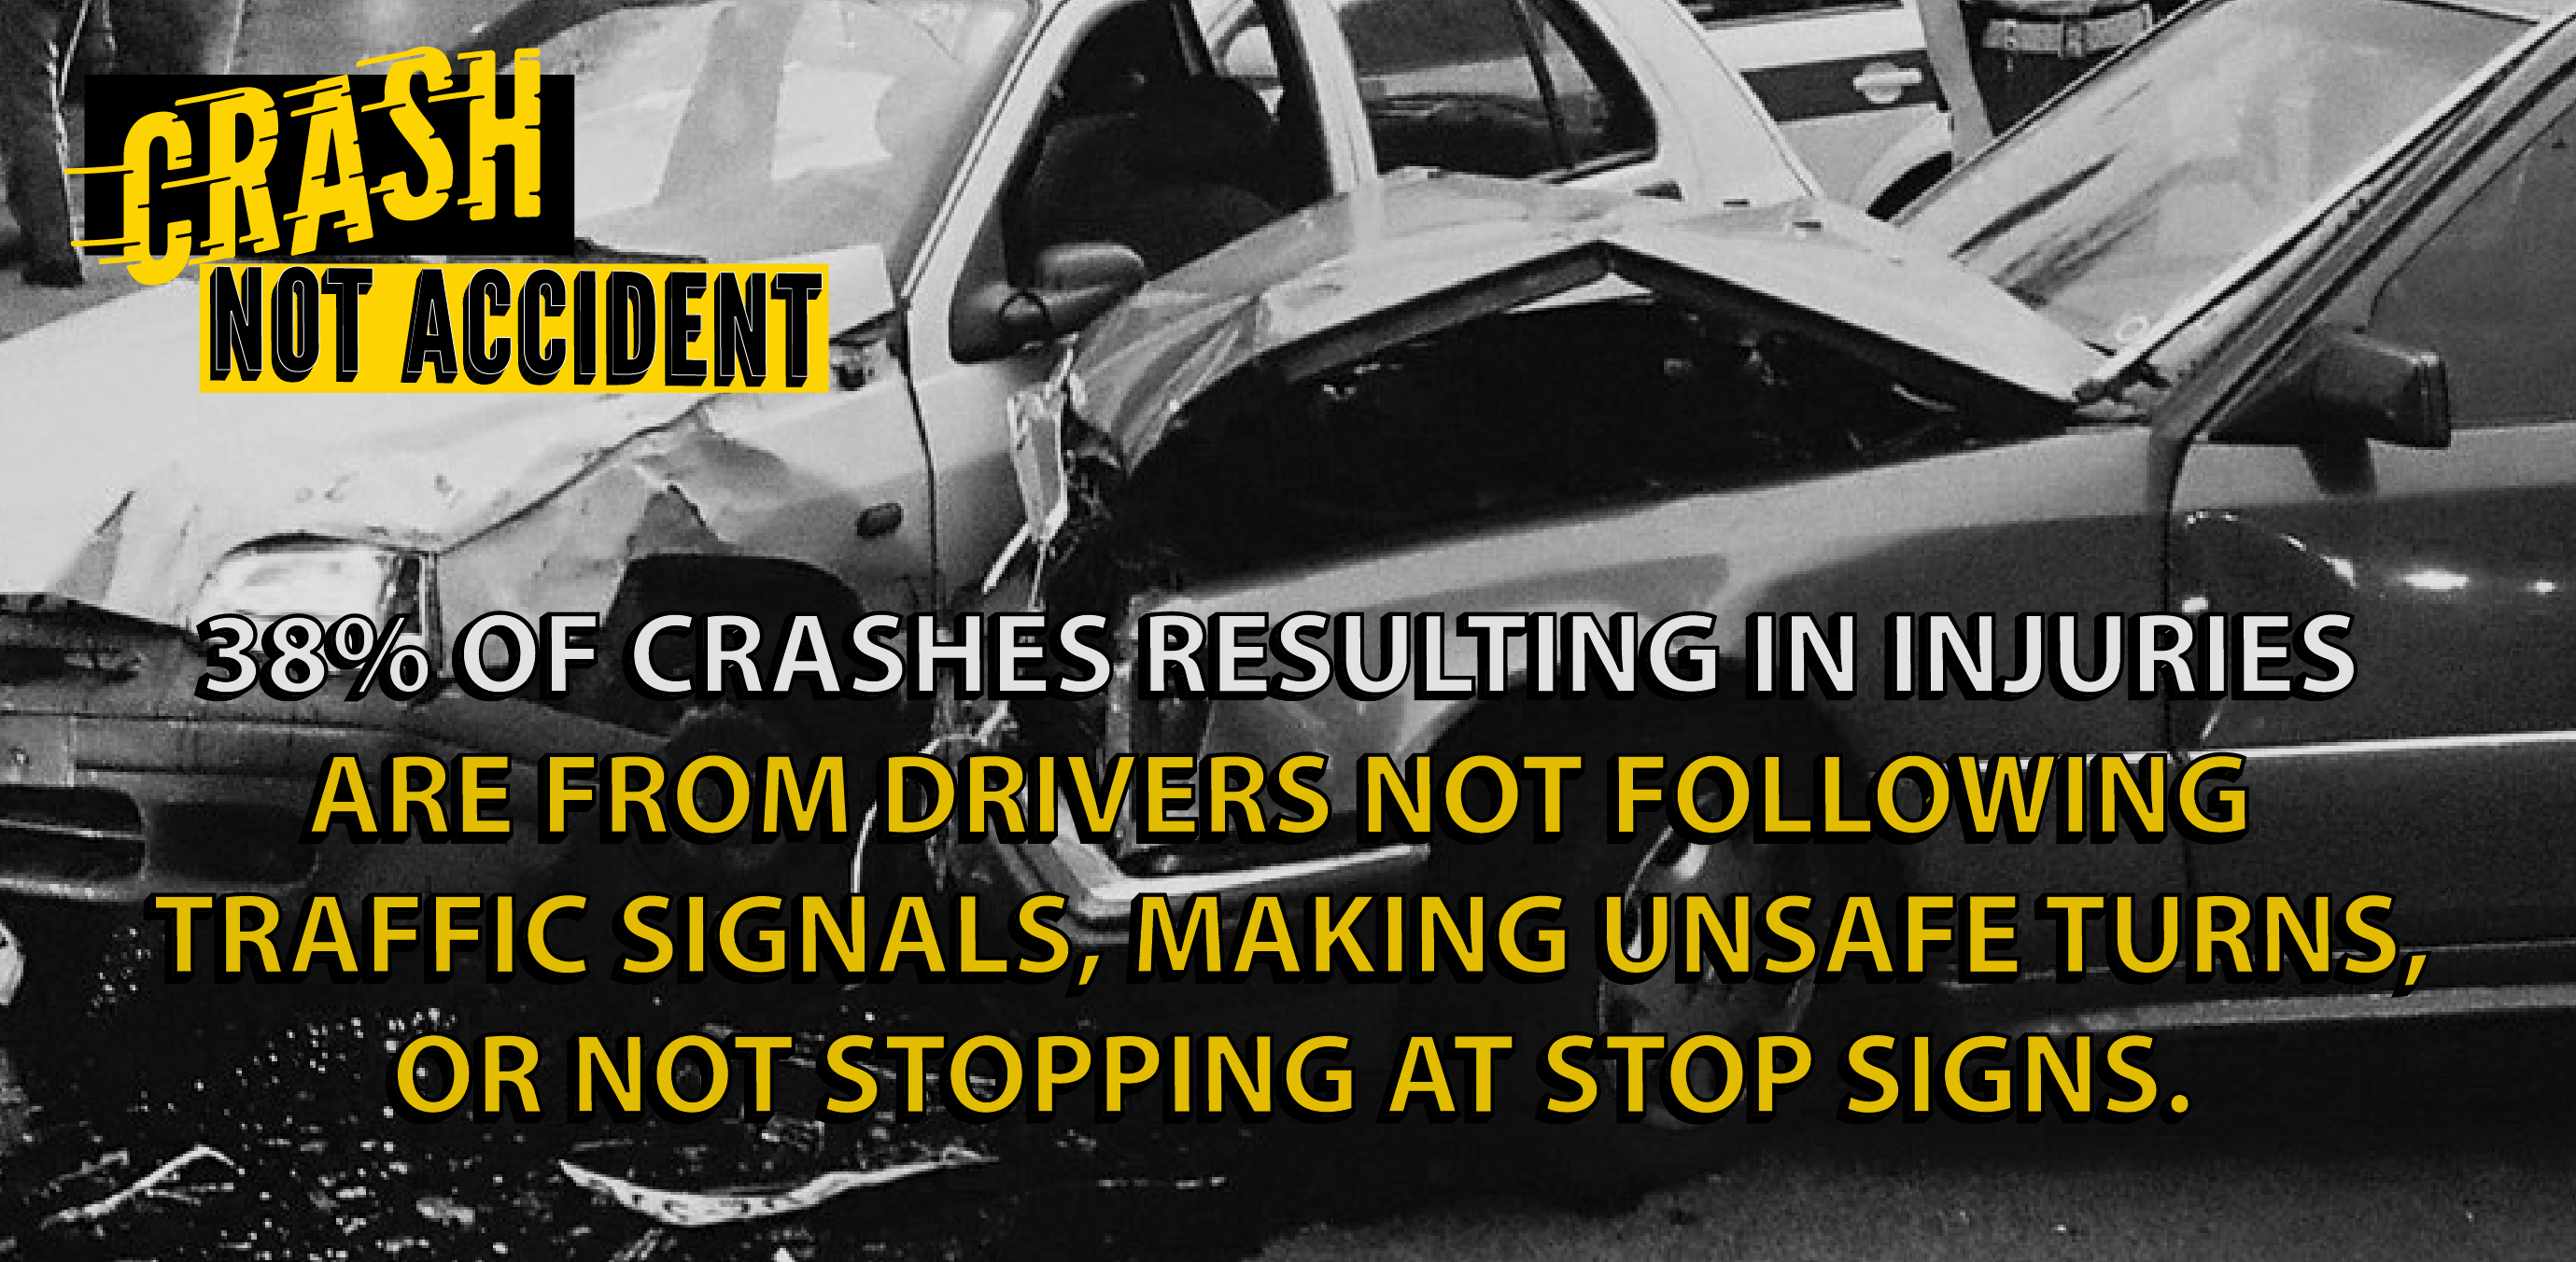 Crash+Not+Accident+San+Diego+Campaign+Launched+to+Raise+Awareness+for+Traffic+Safety